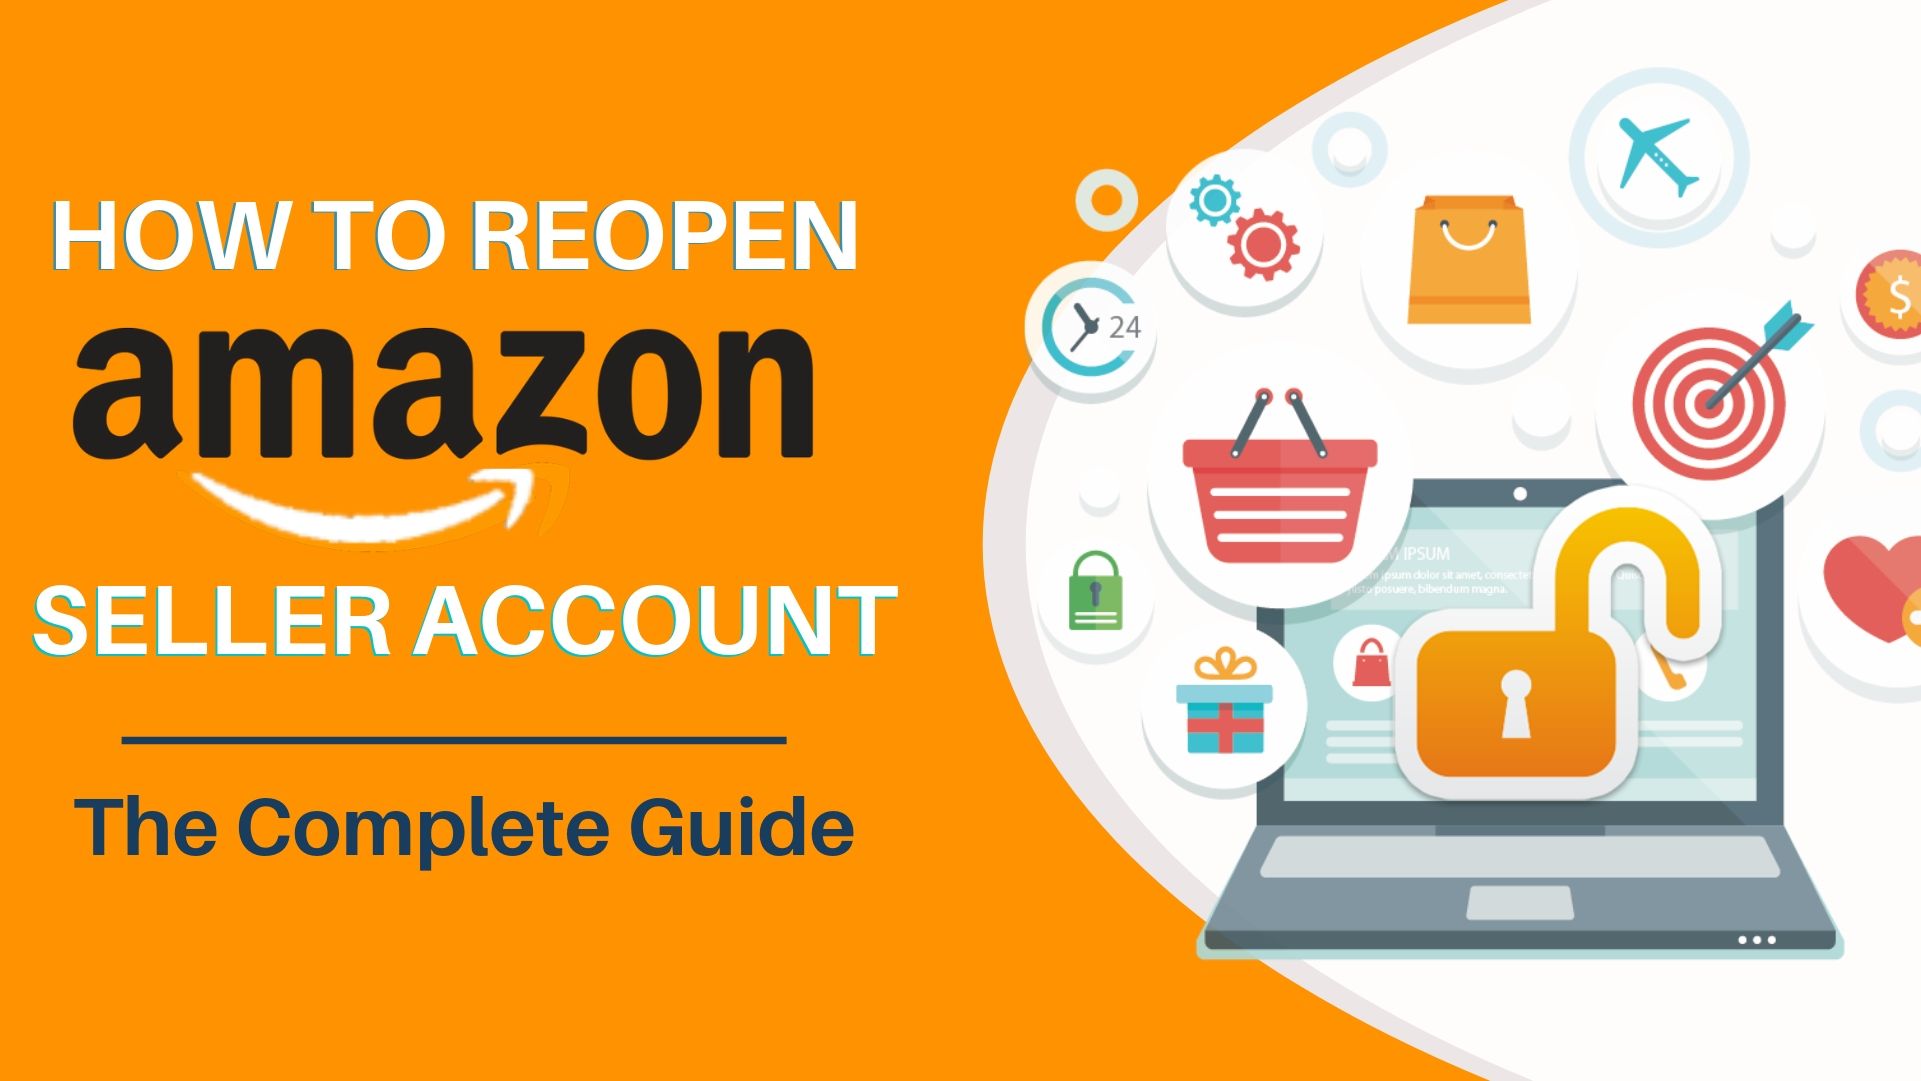 HOW TO REOPEN AMAZON SELLER ACCOUNT – THE COMPLETE GUIDE